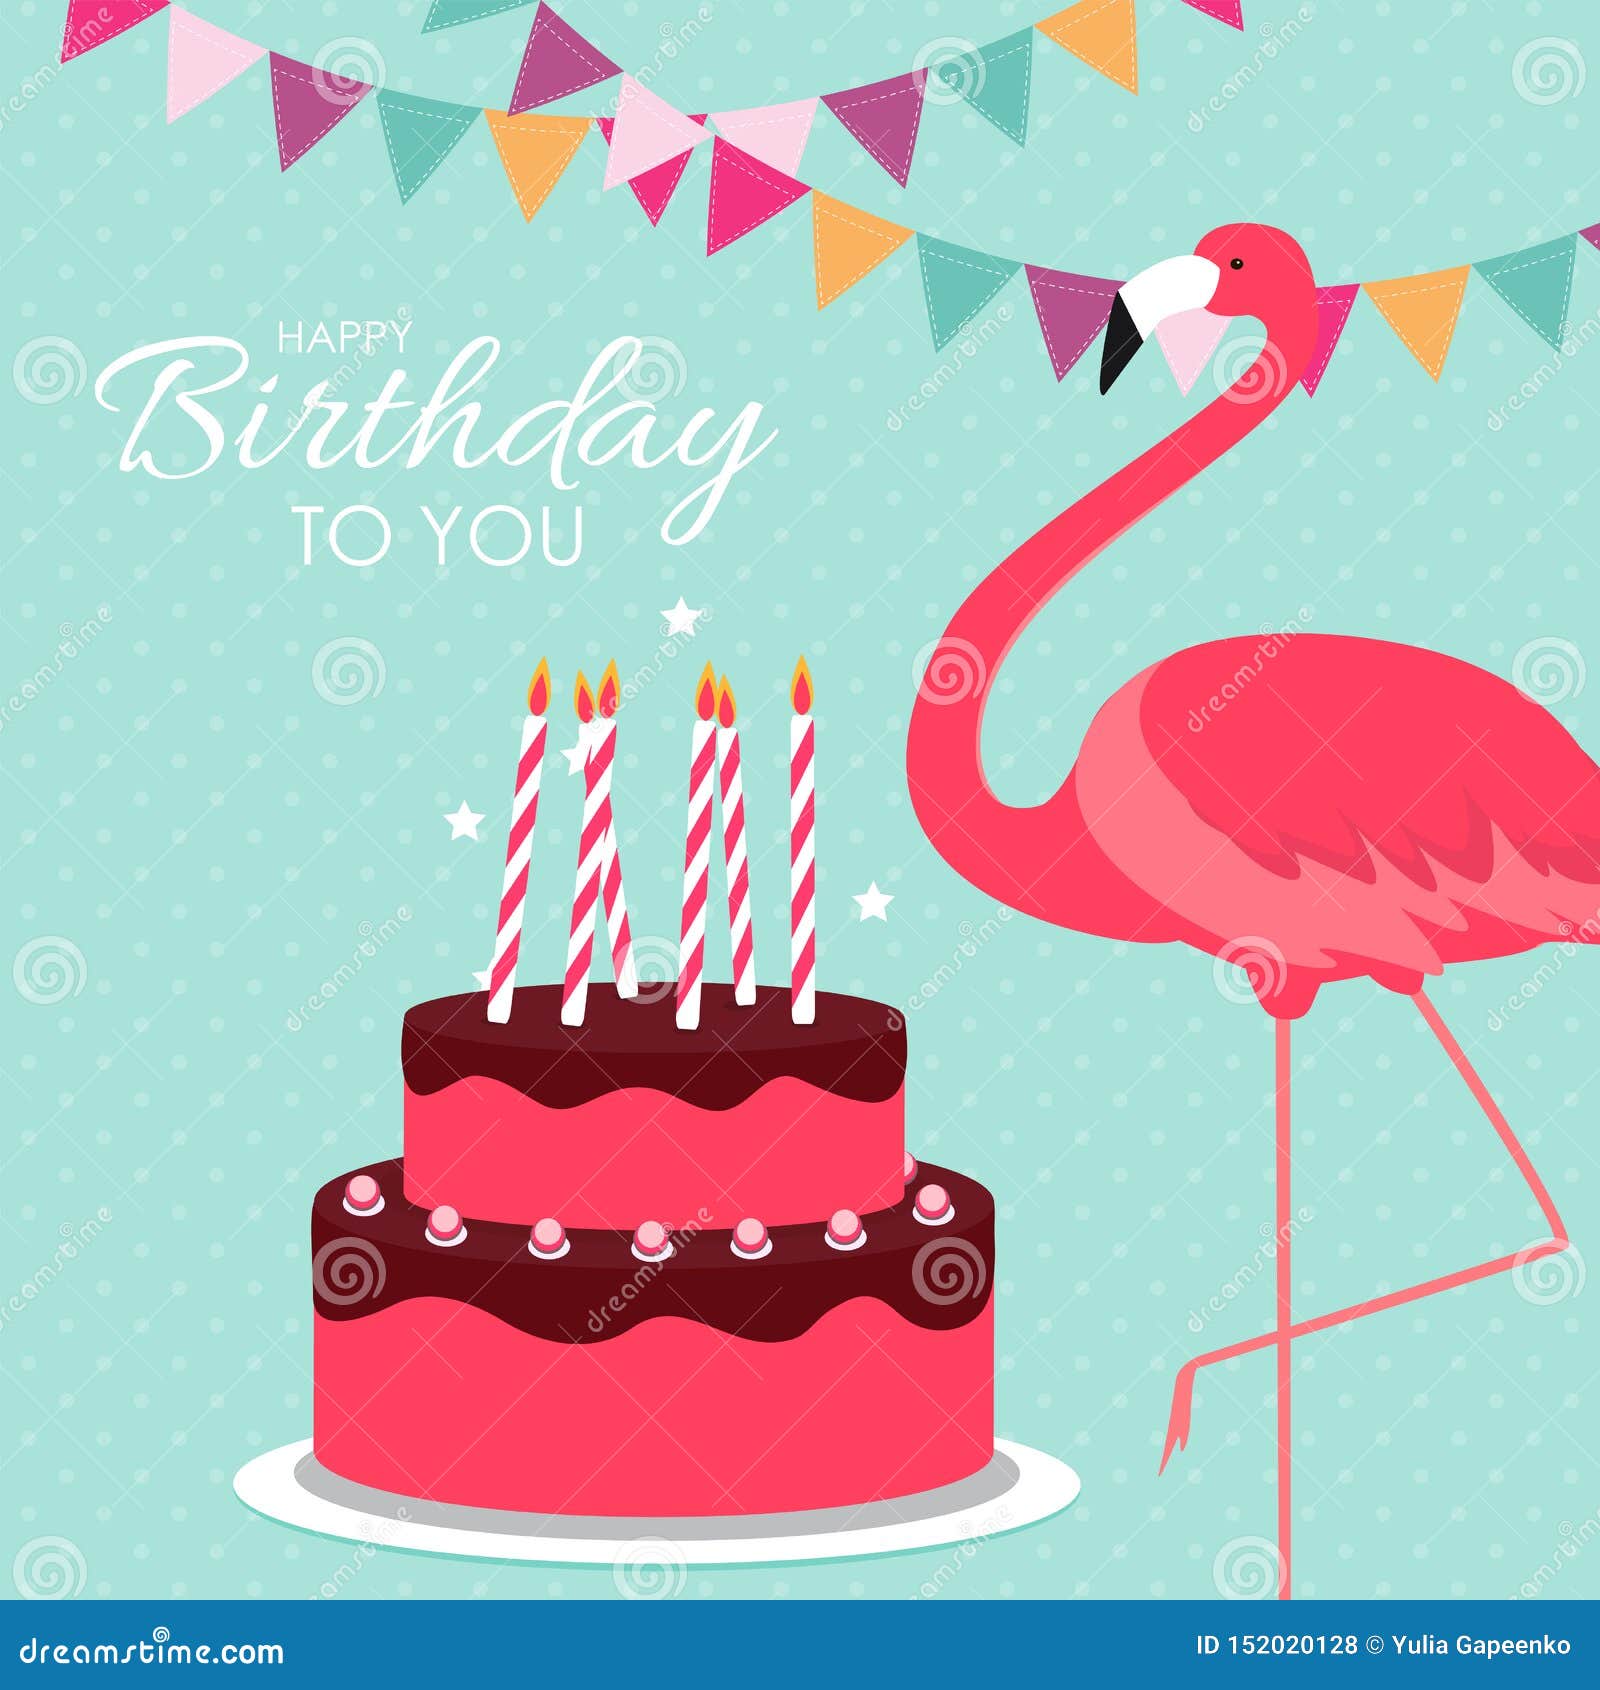 Happy Birthday Poster Background With Cake Colorful And Cartoon Pink Flamingo Illustration Stock Illustration Illustration Of Design Colorful